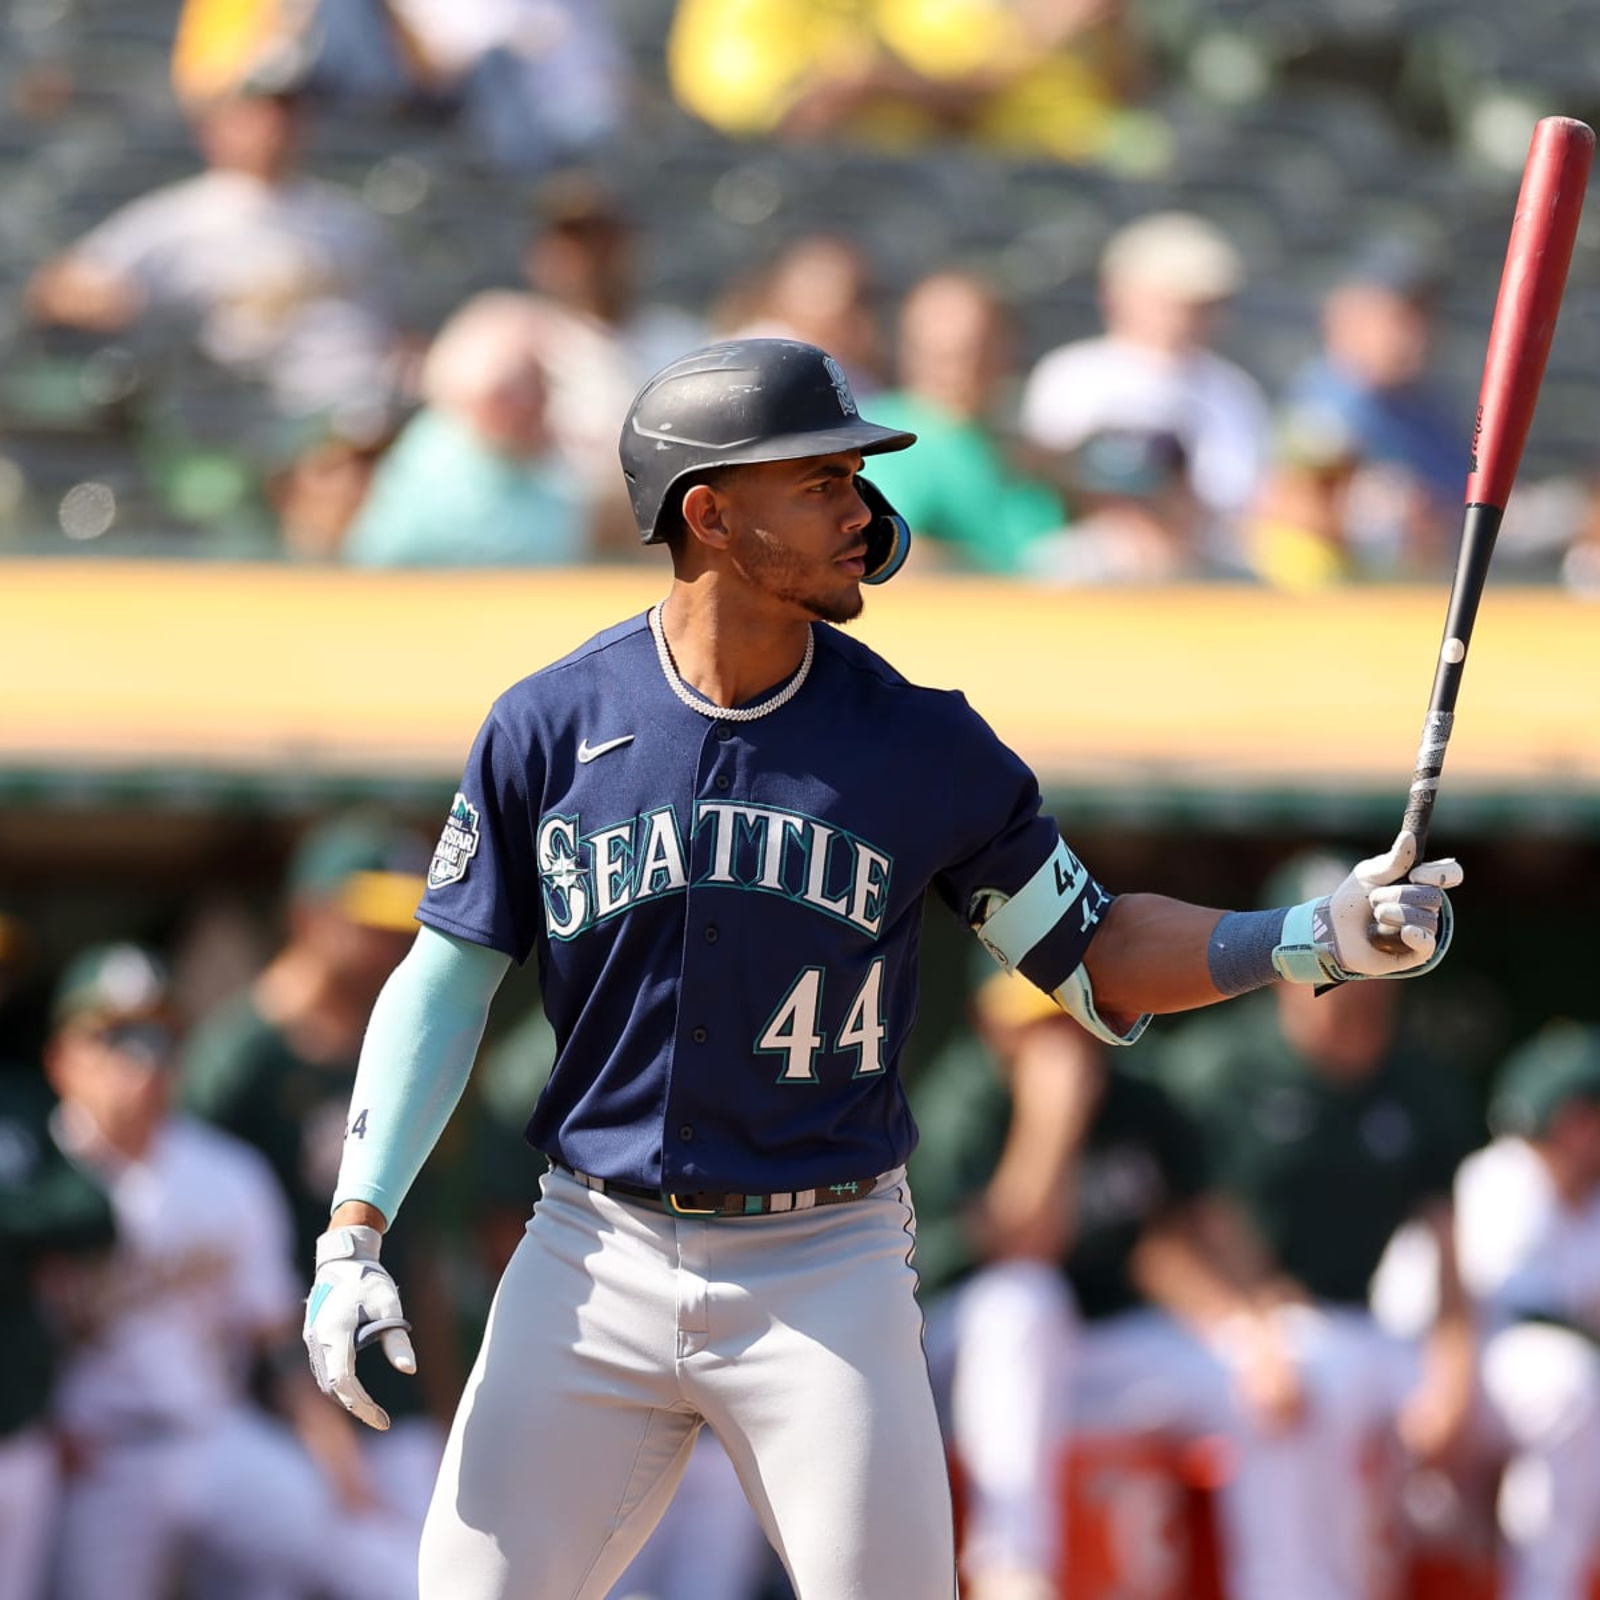 3 Colorado Rockies players that would suit the Seattle Mariners